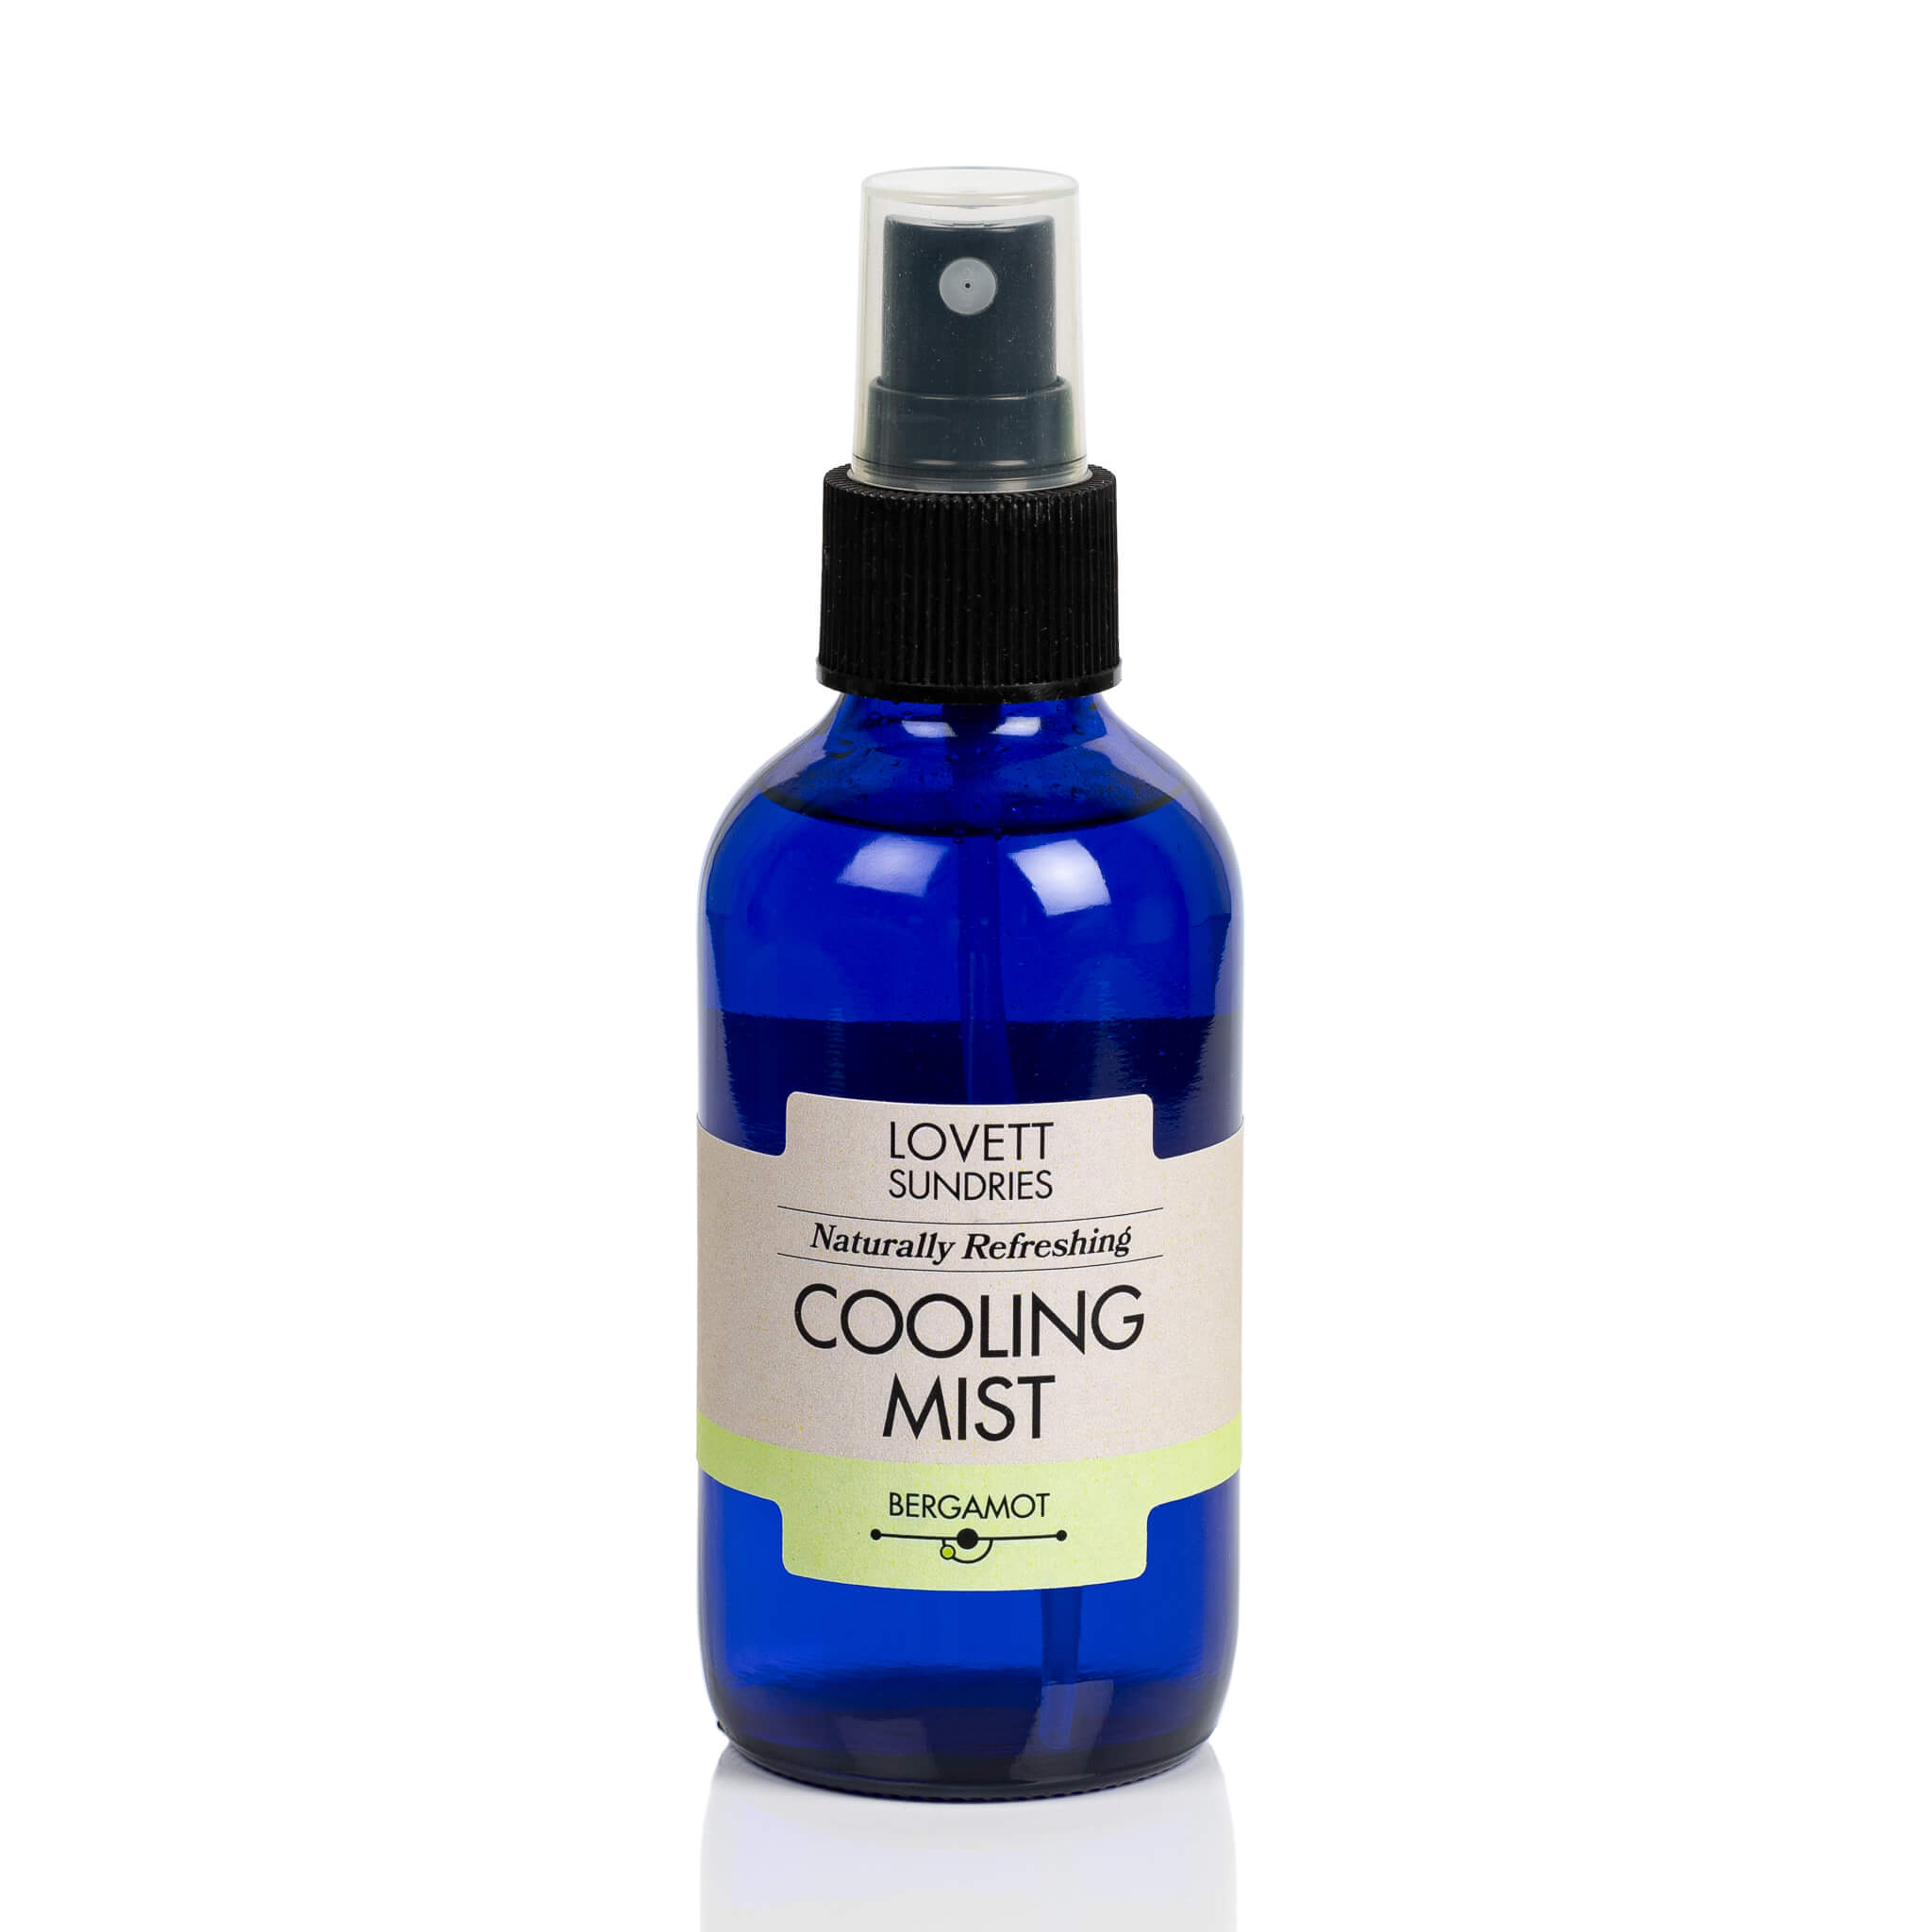 All natural refreshing bergamot scented cooling mist in a blue glass bottle with a sprayer. 